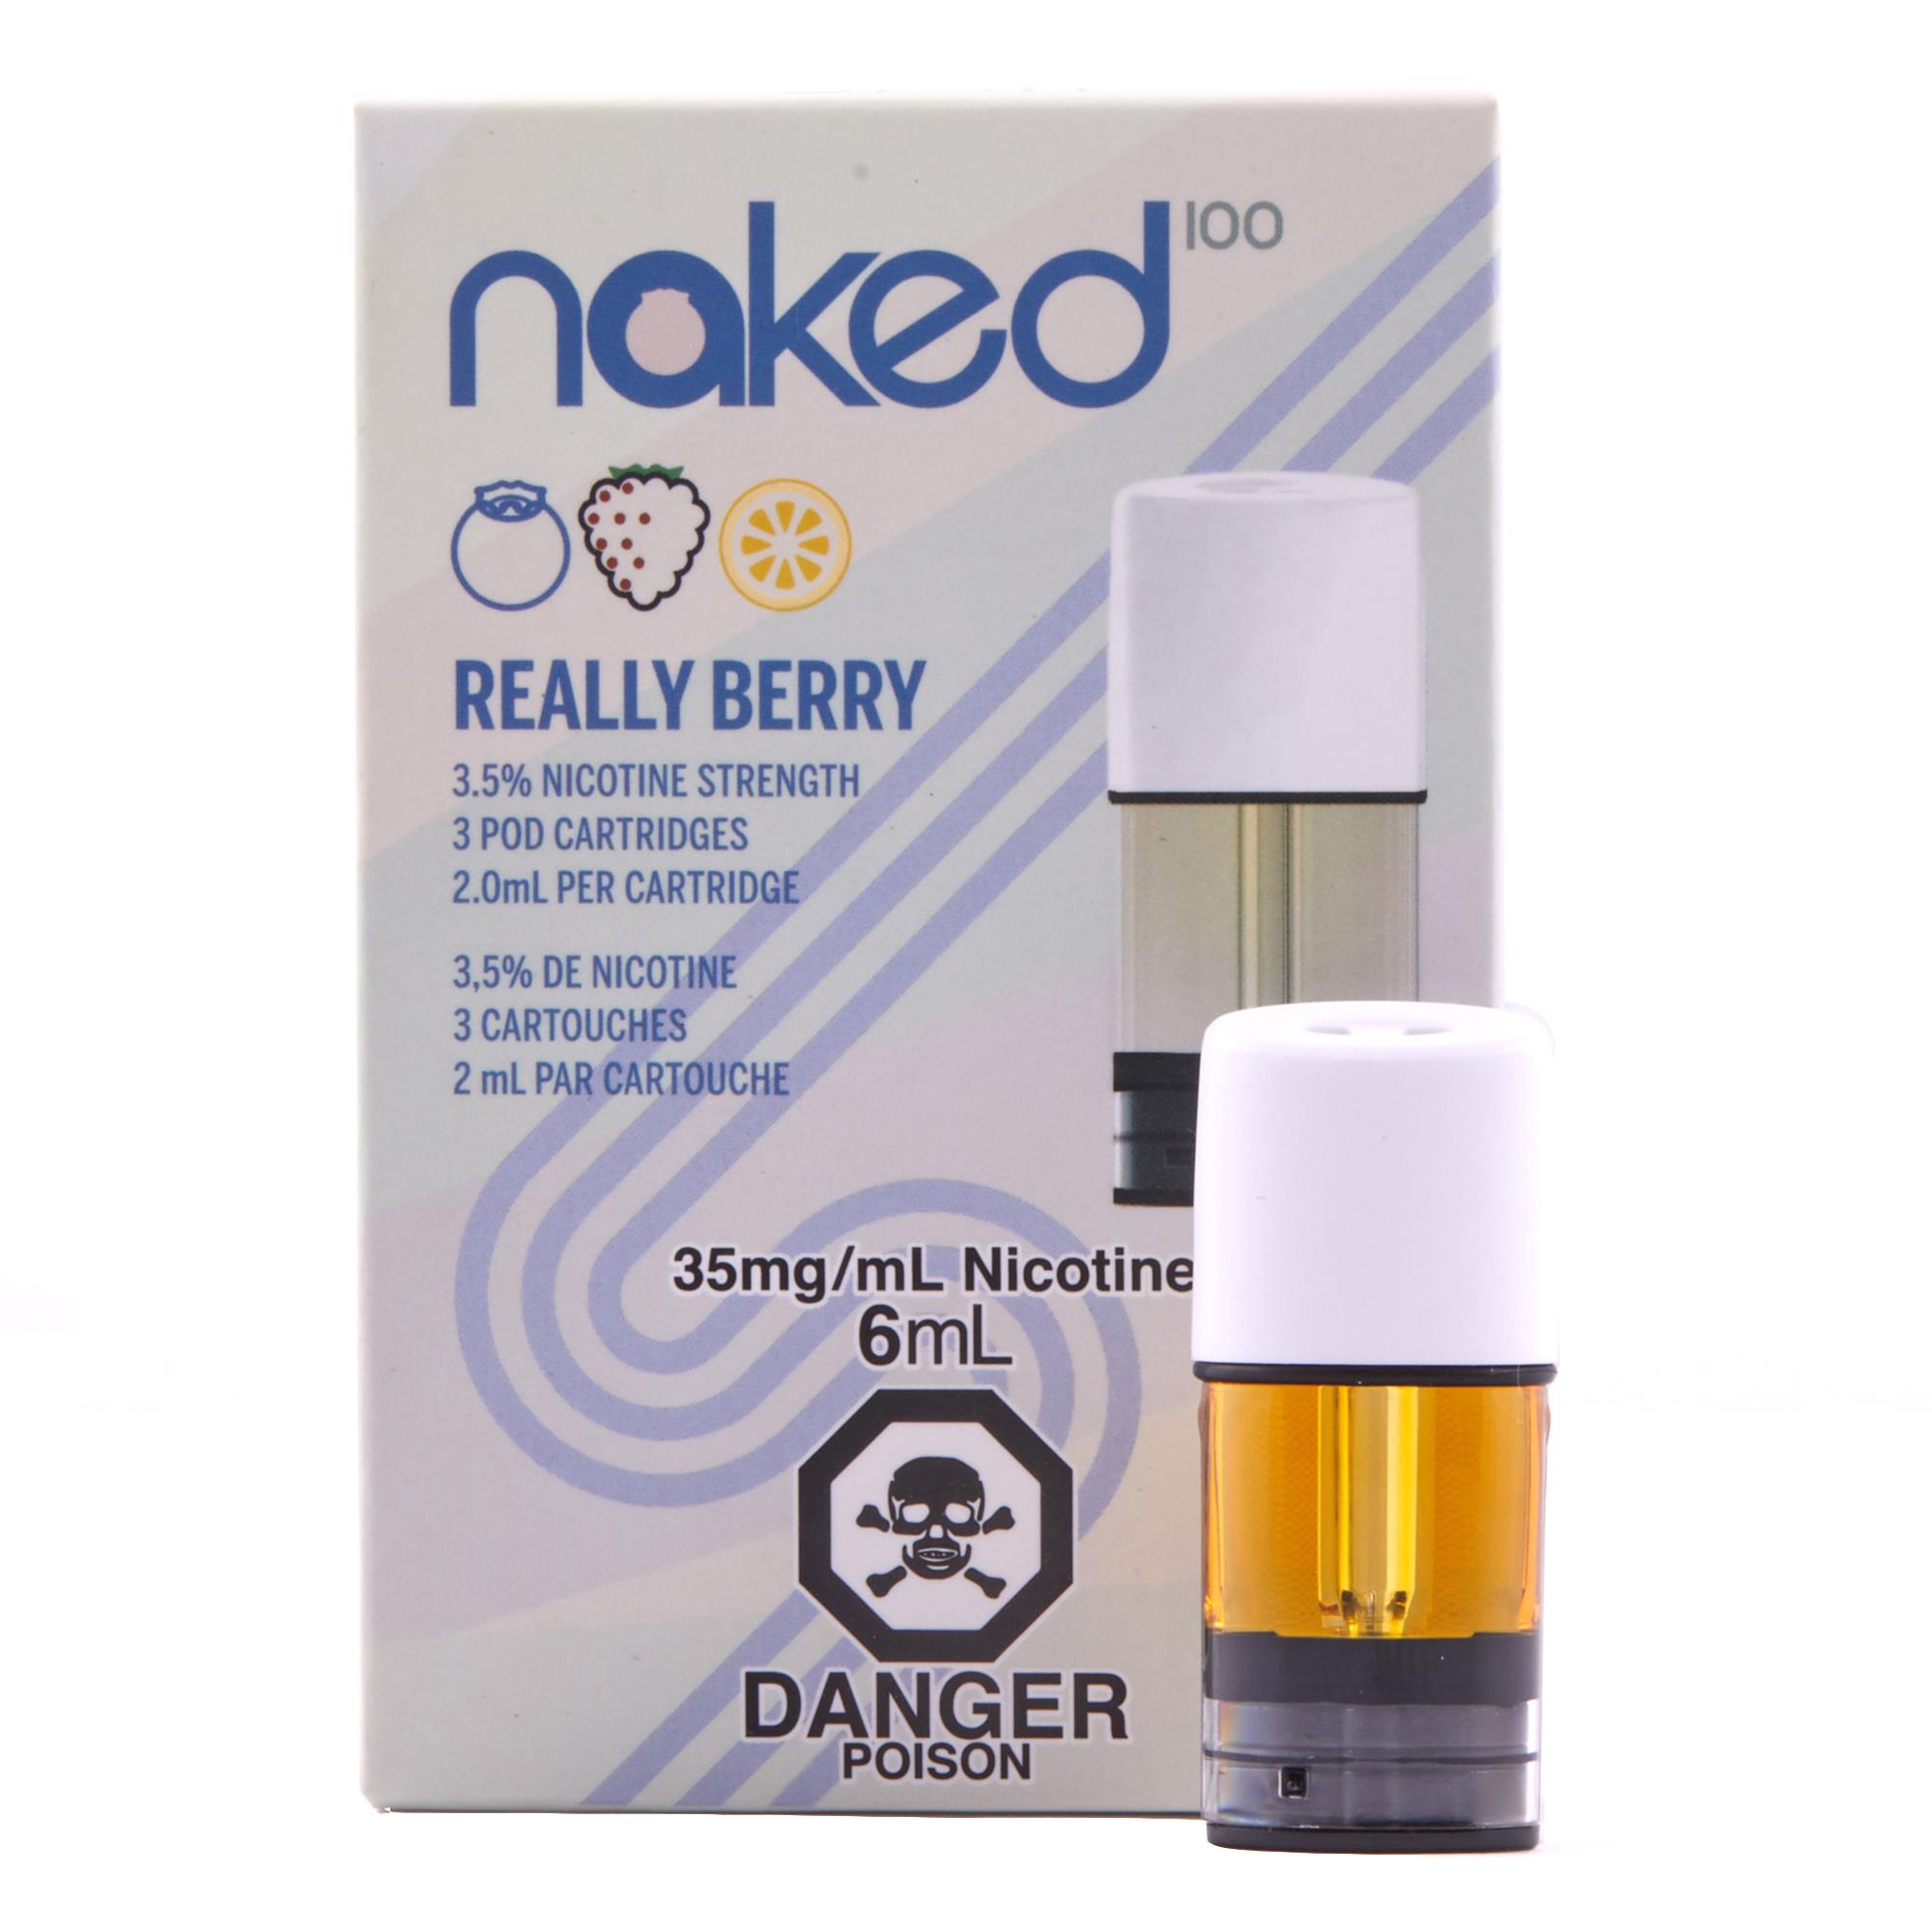 STLTH NAKED REALLY BERRY PODS